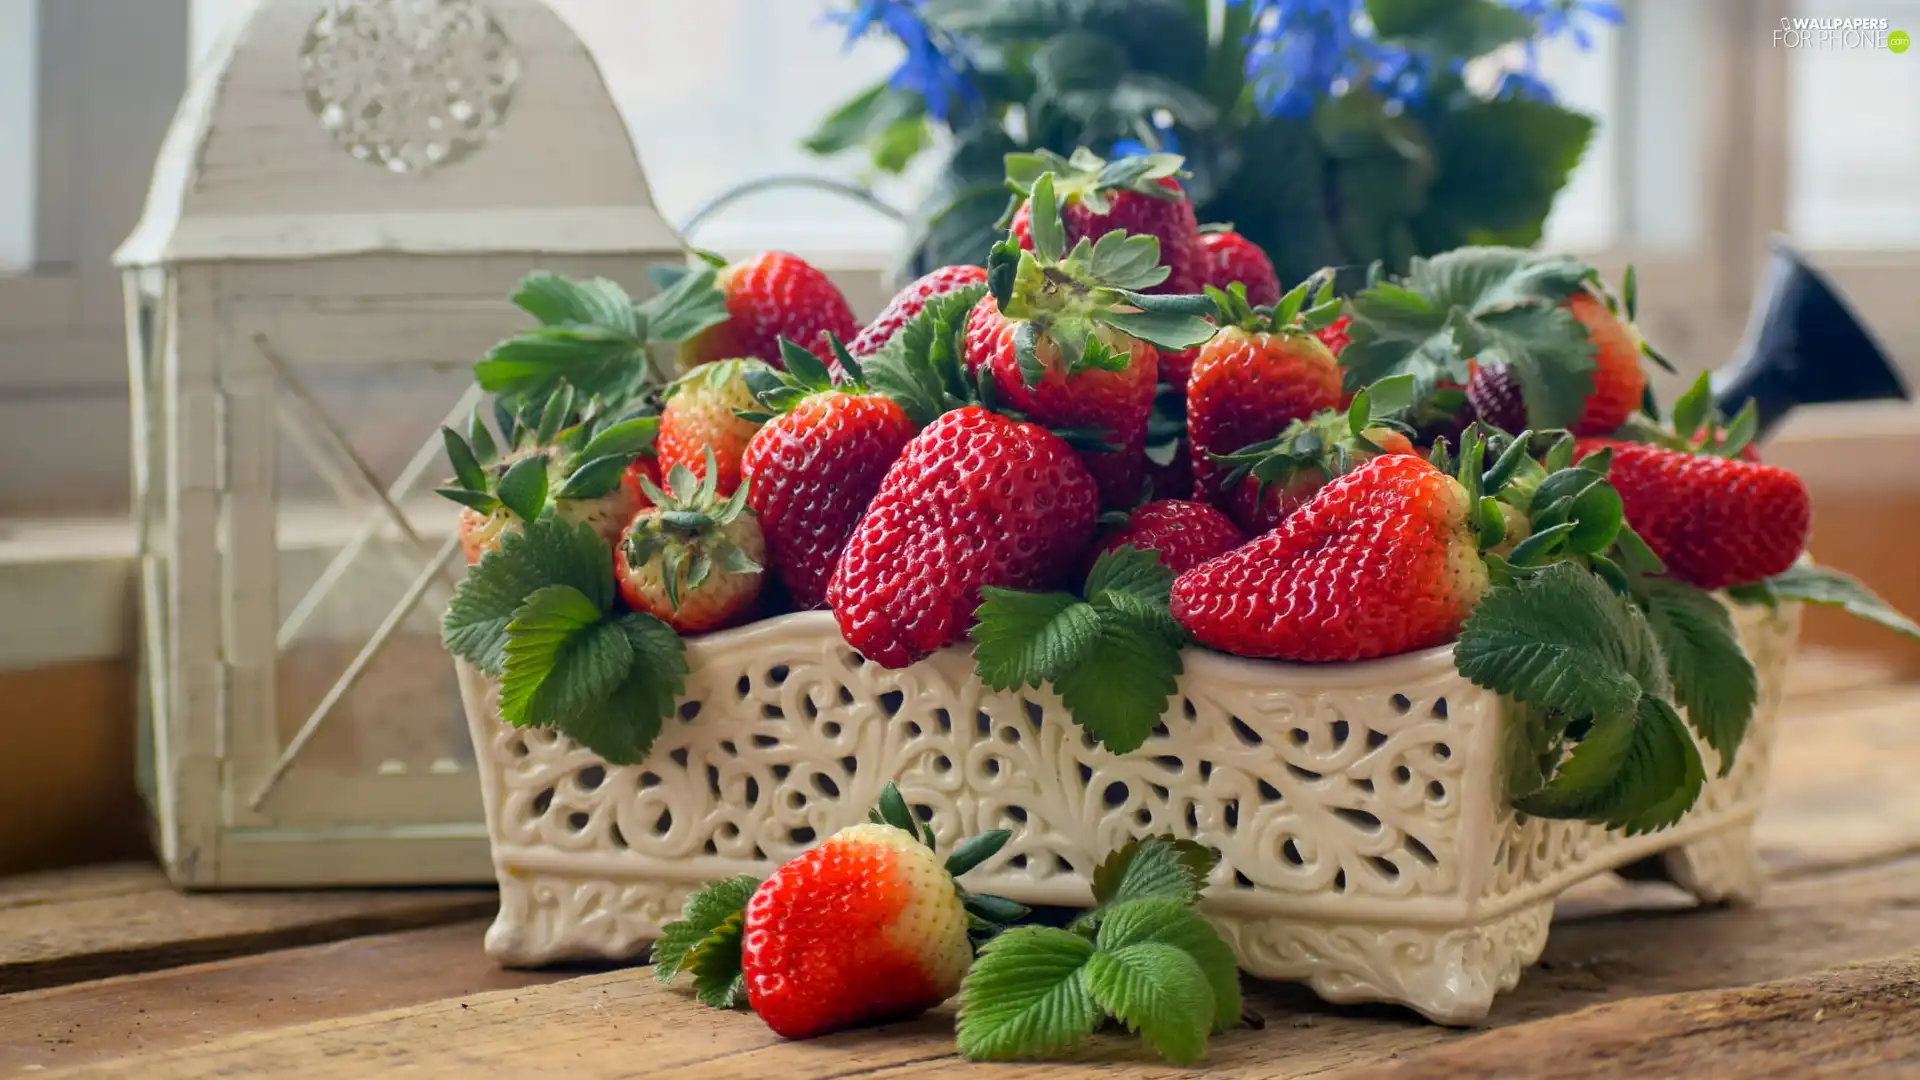 container, Castellated, strawberries, lantern, Mature, bowl